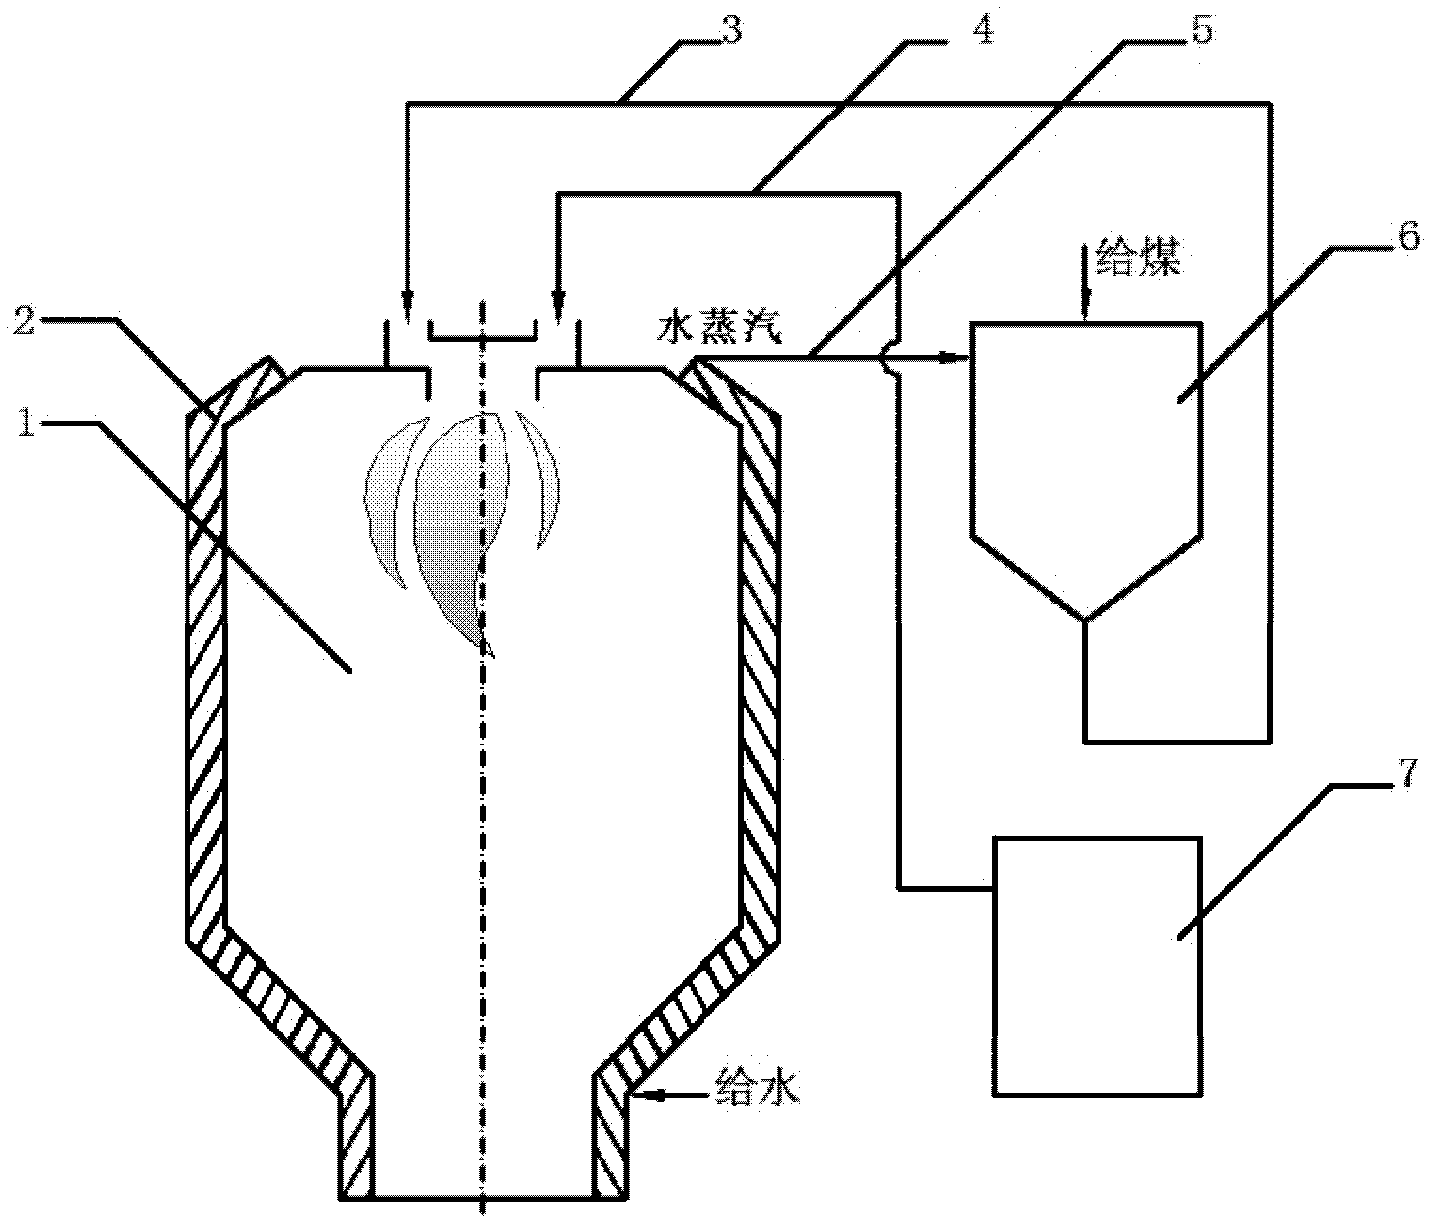 Entrained-flow bed gasification system and method for vapour conveyed pulverized coal